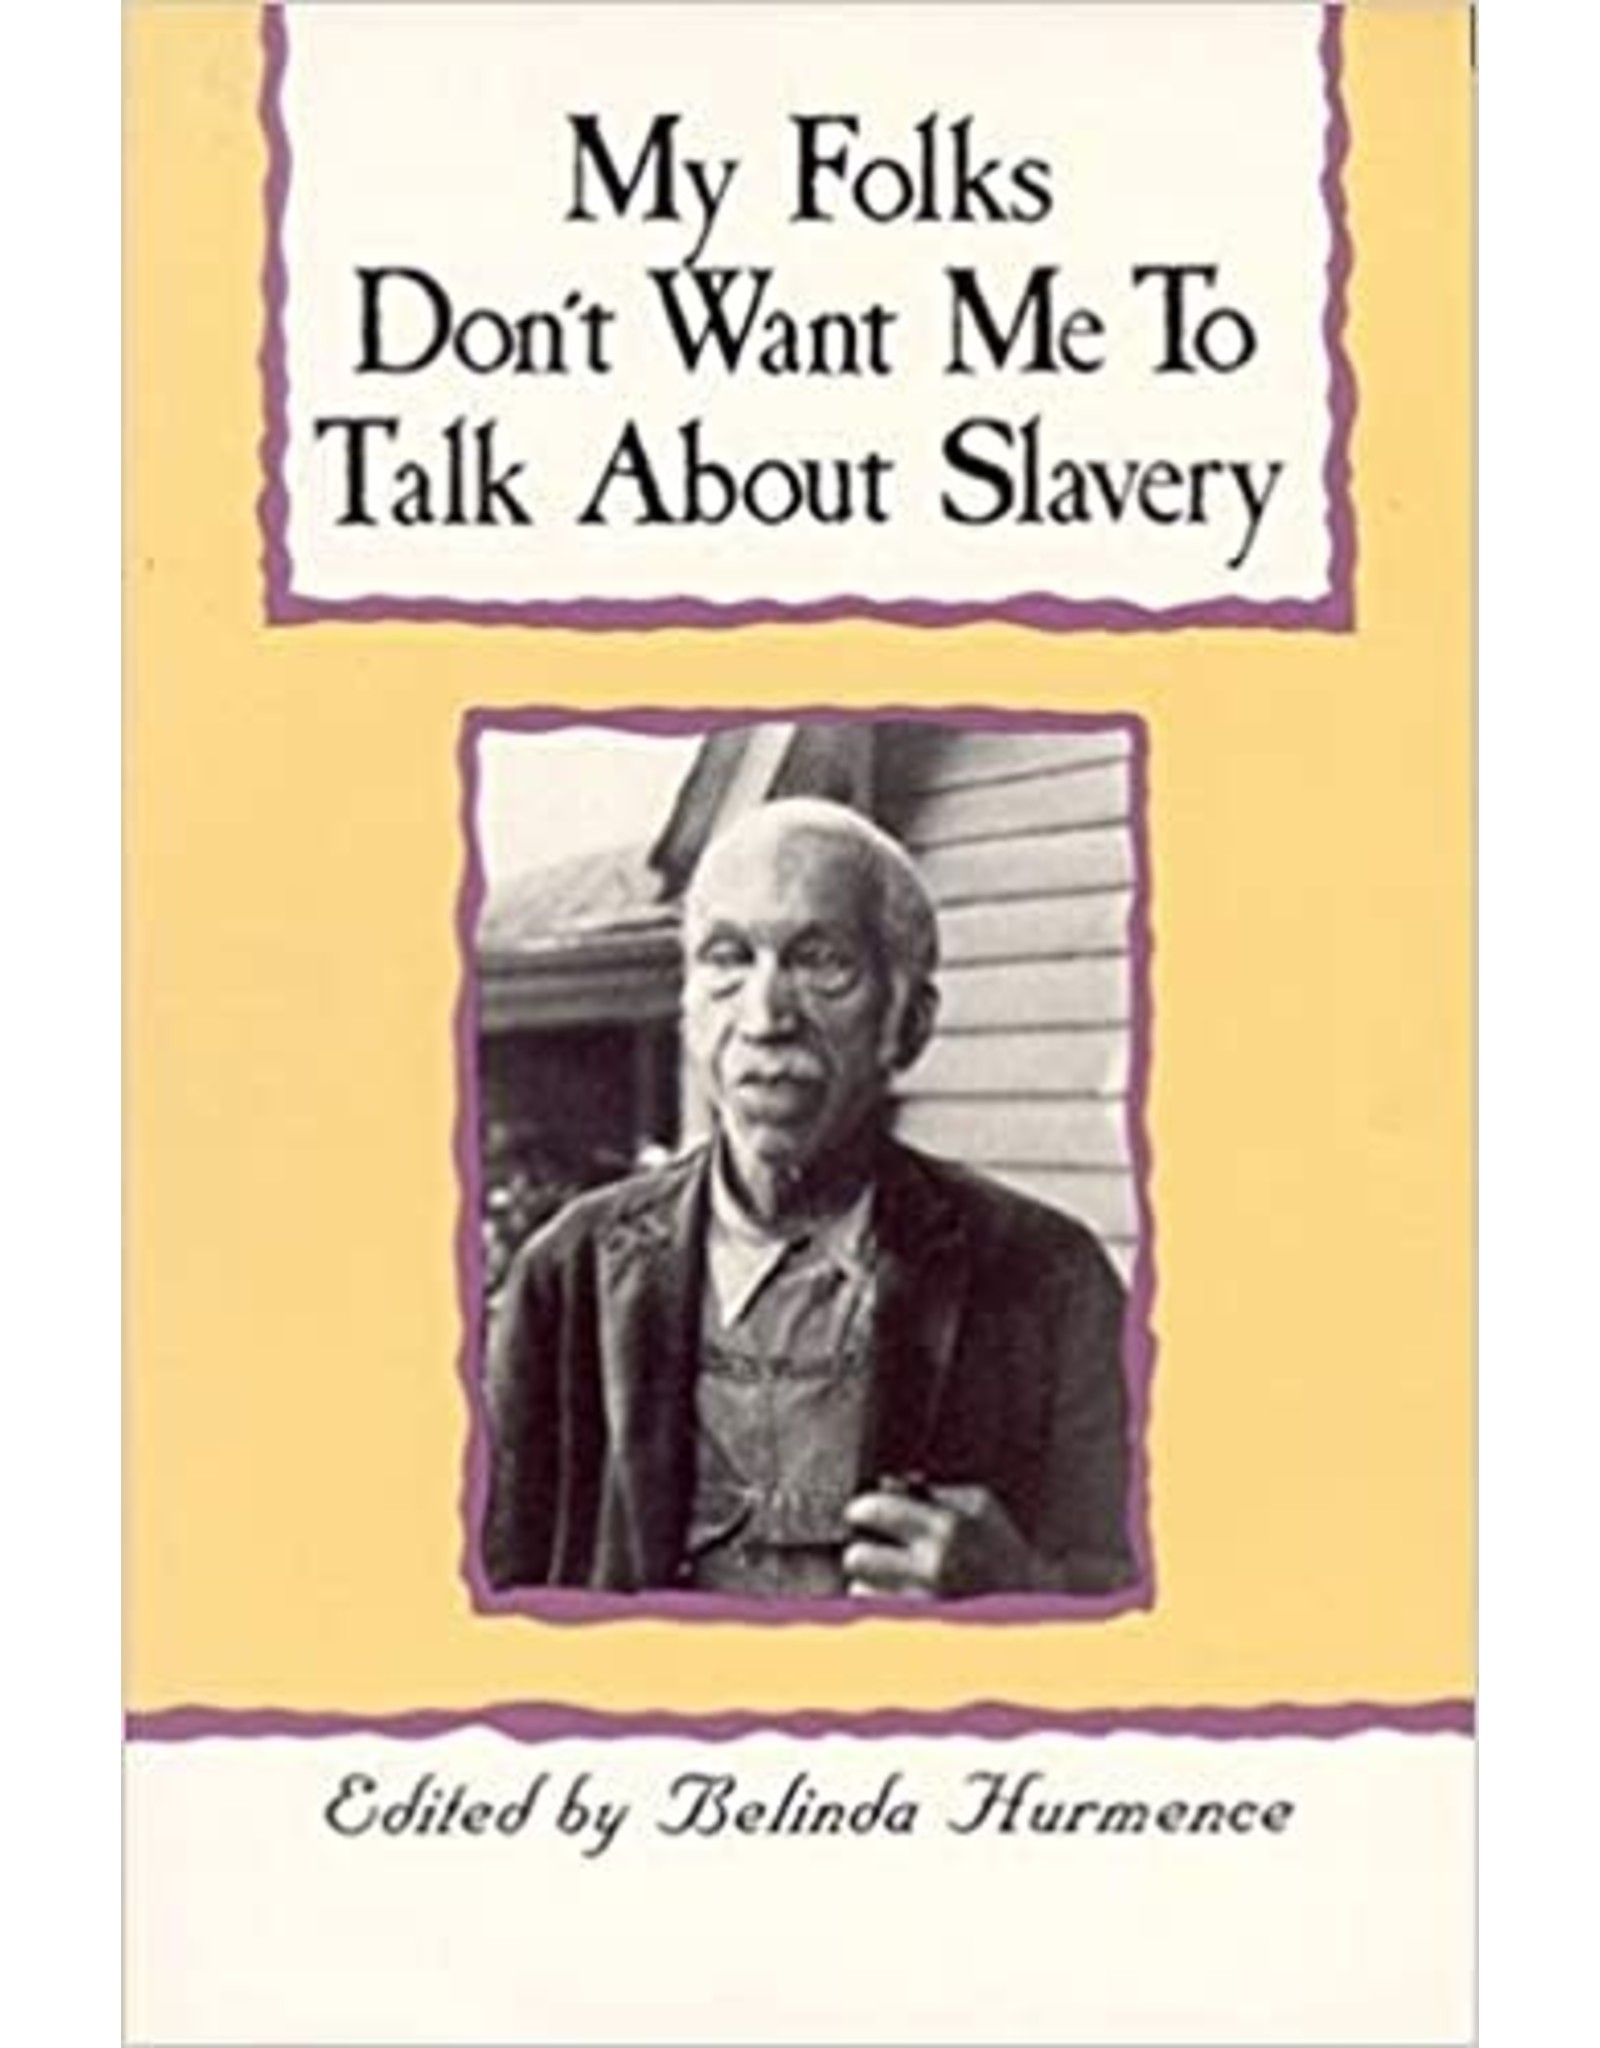 Non-Fiction: Slave Narratives My Folks Don't Want Me to Talk About Slavery